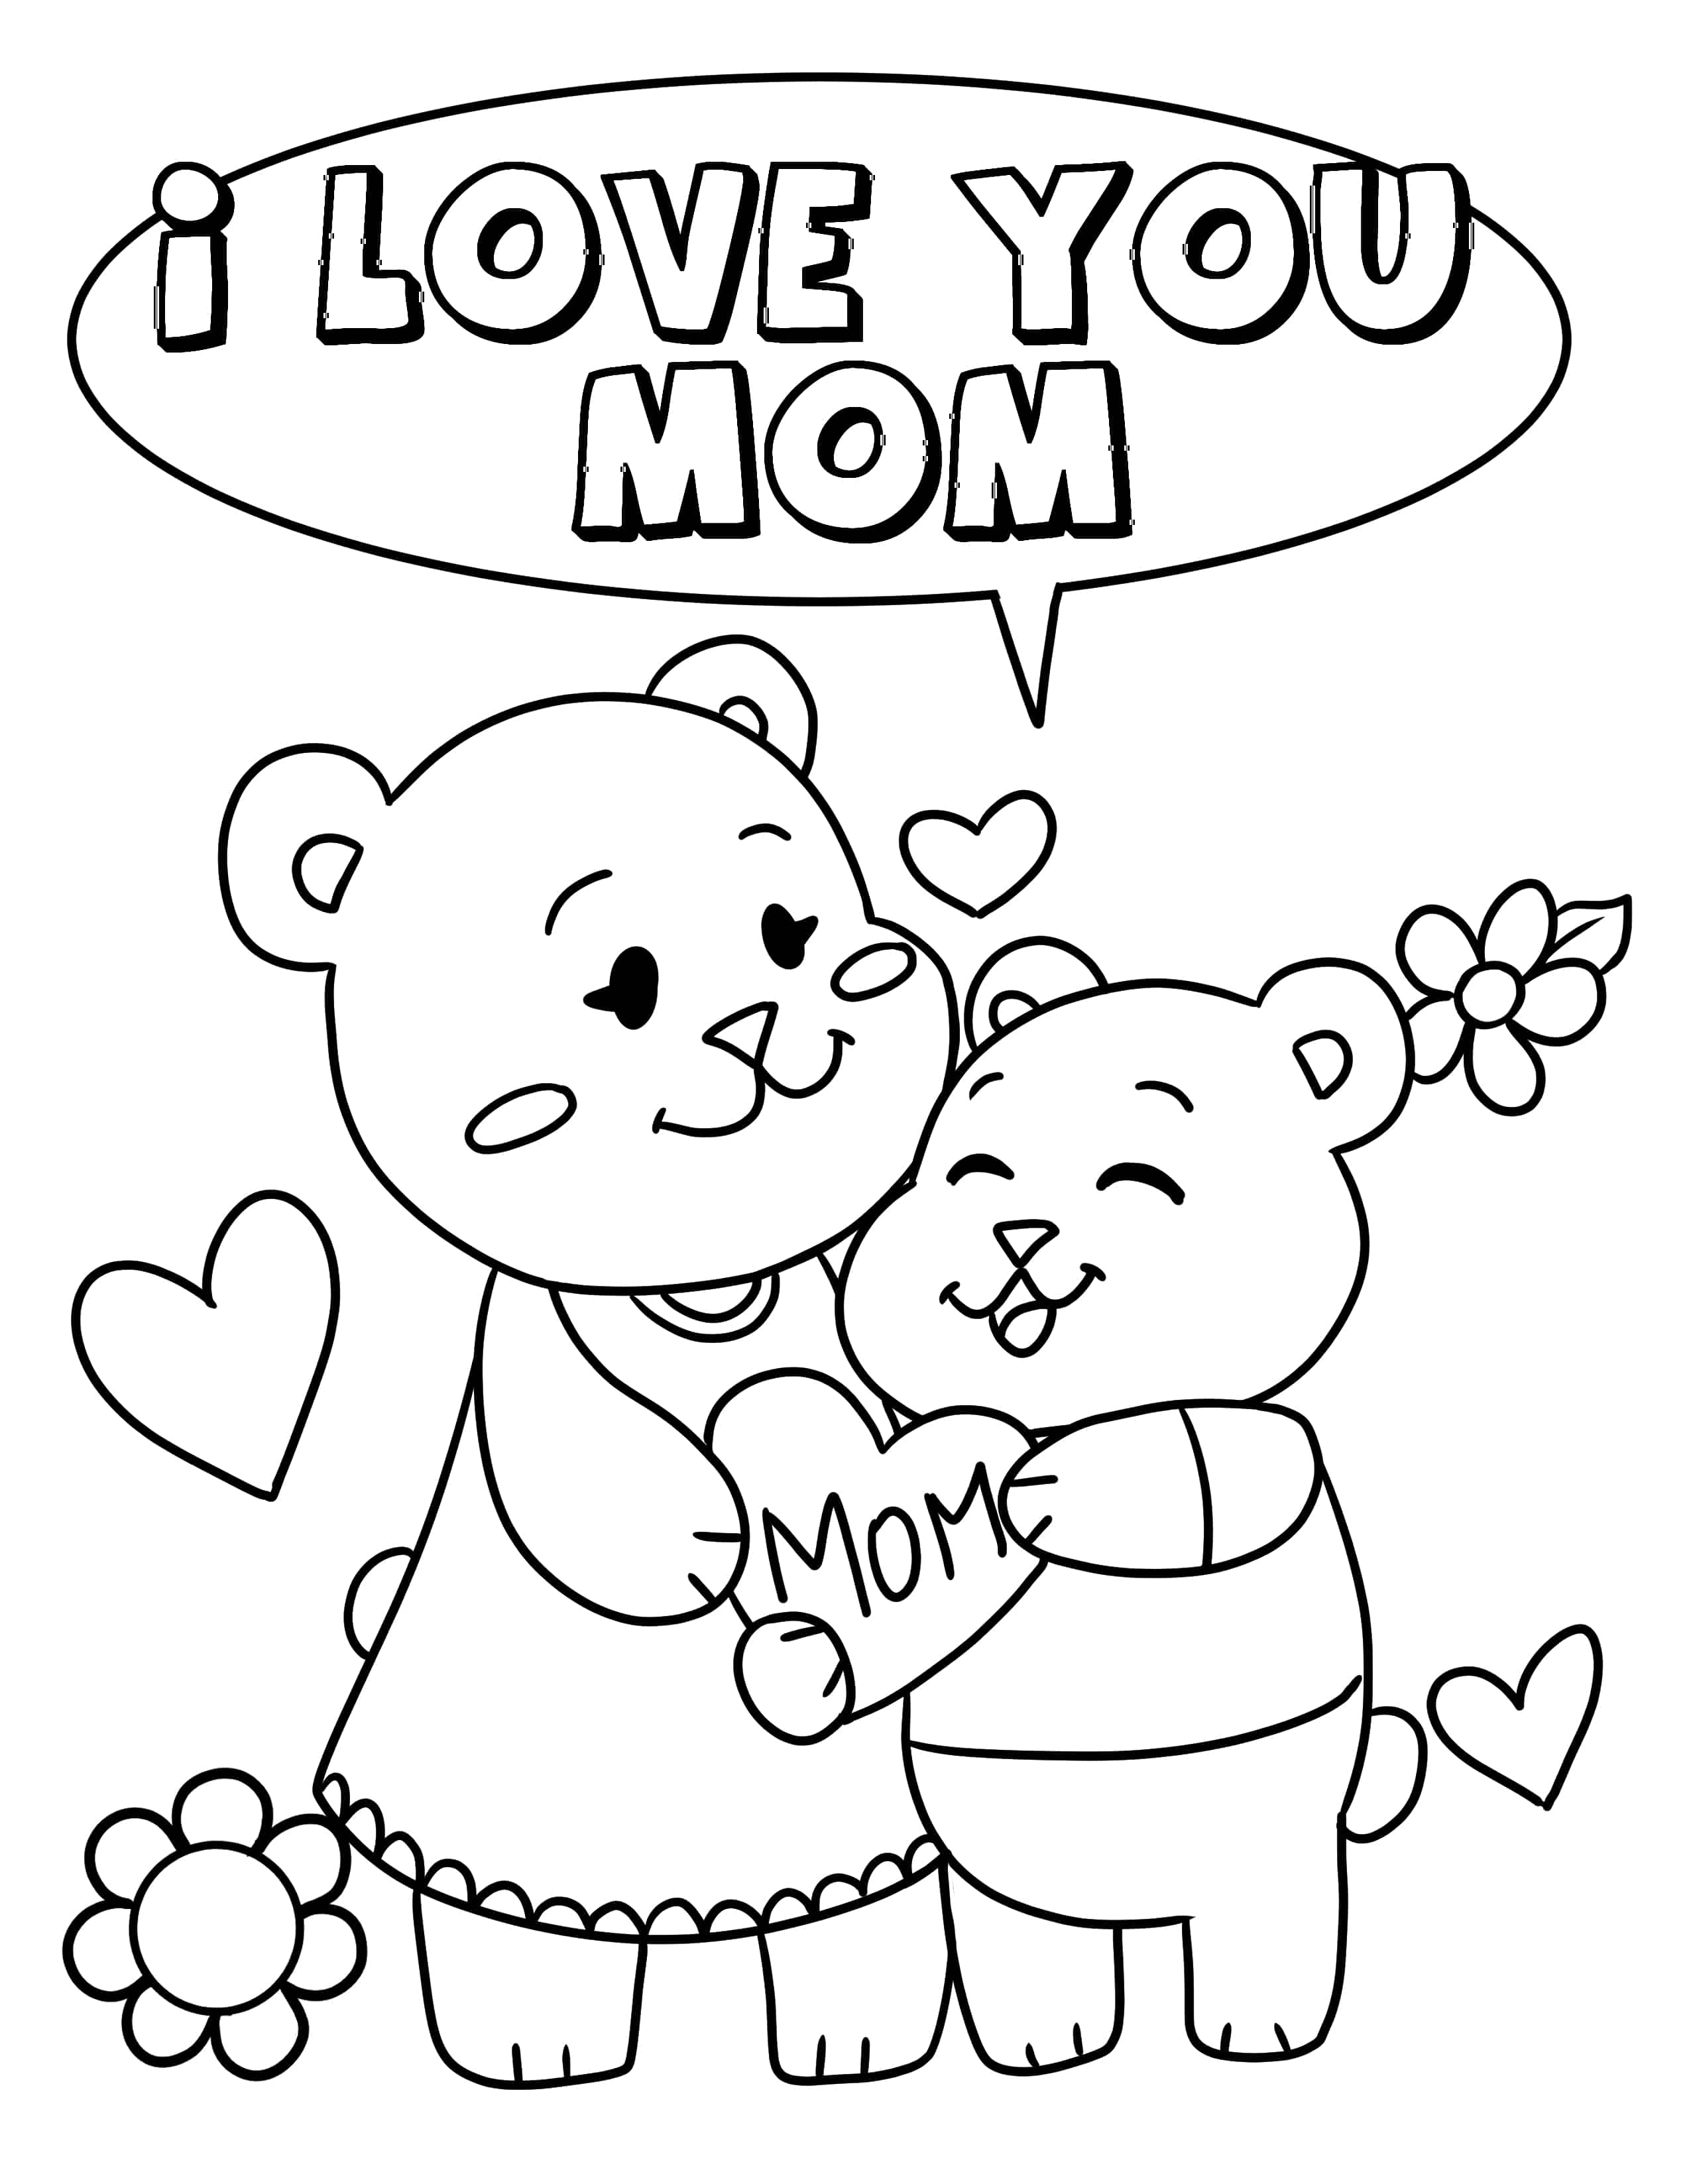 3 Mother's Day Coloring Pages Free Printables - Freebie Finding Mom